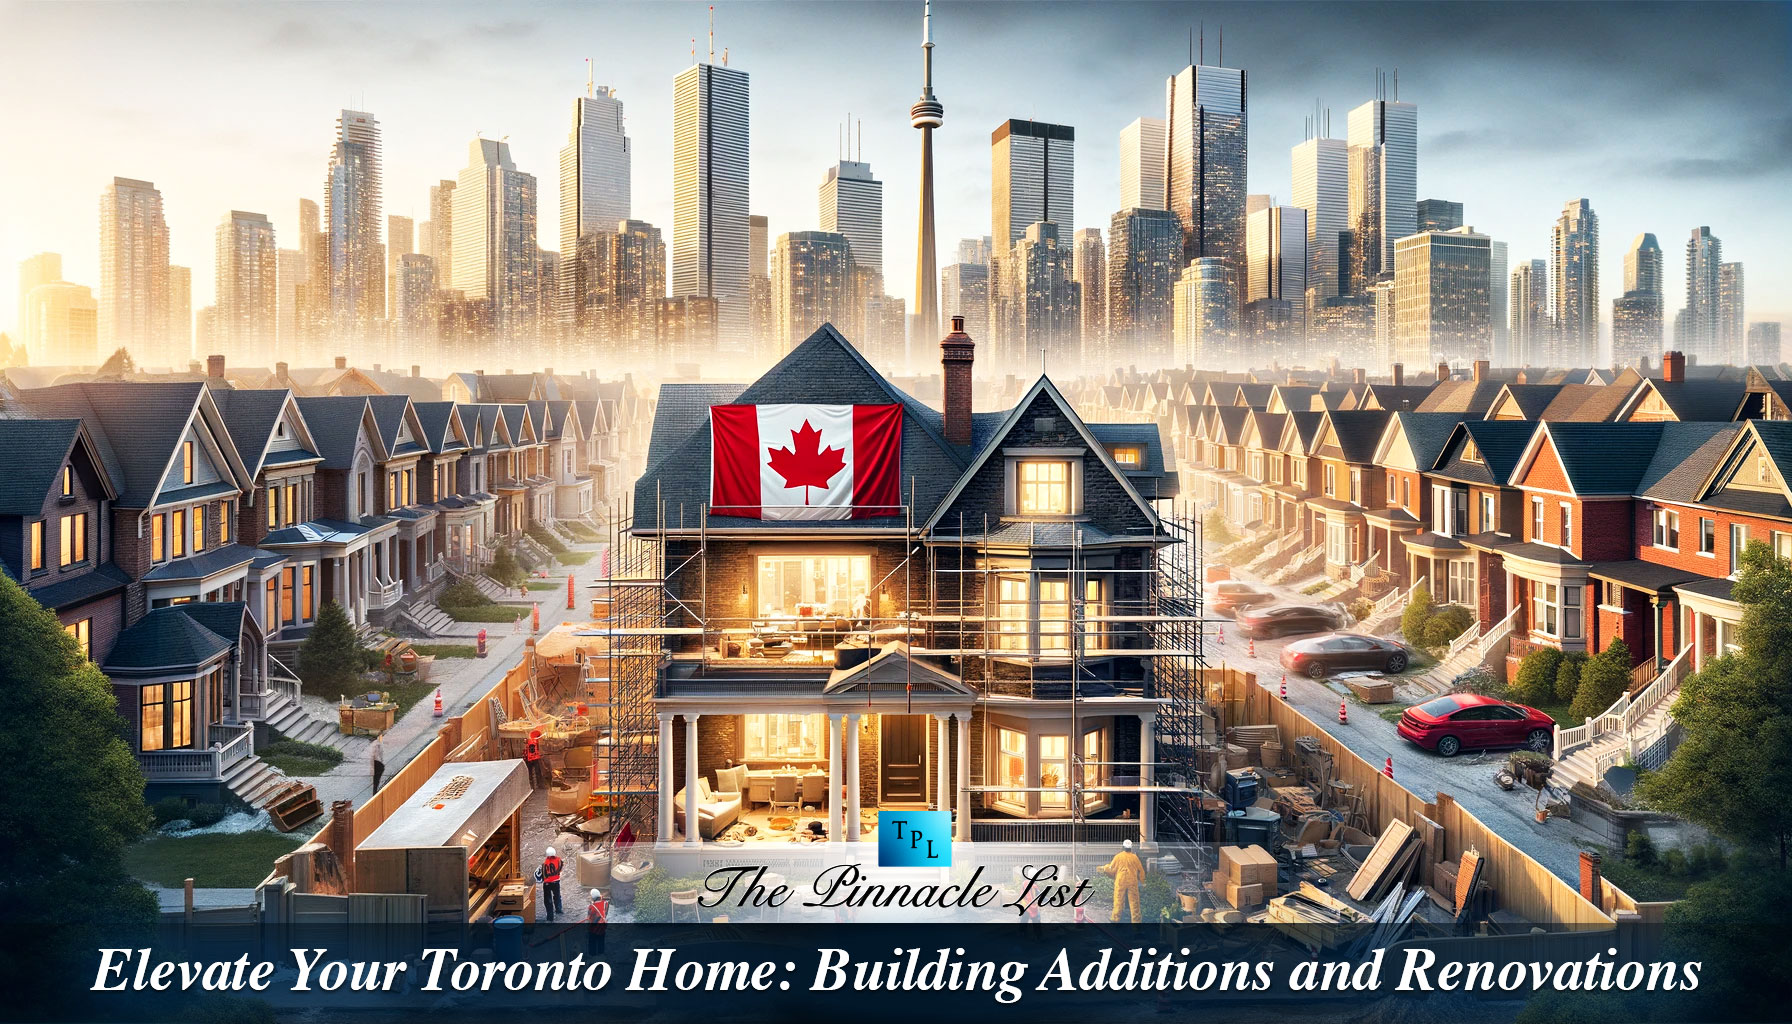 Elevate Your Toronto Home: Building Additions and Renovations